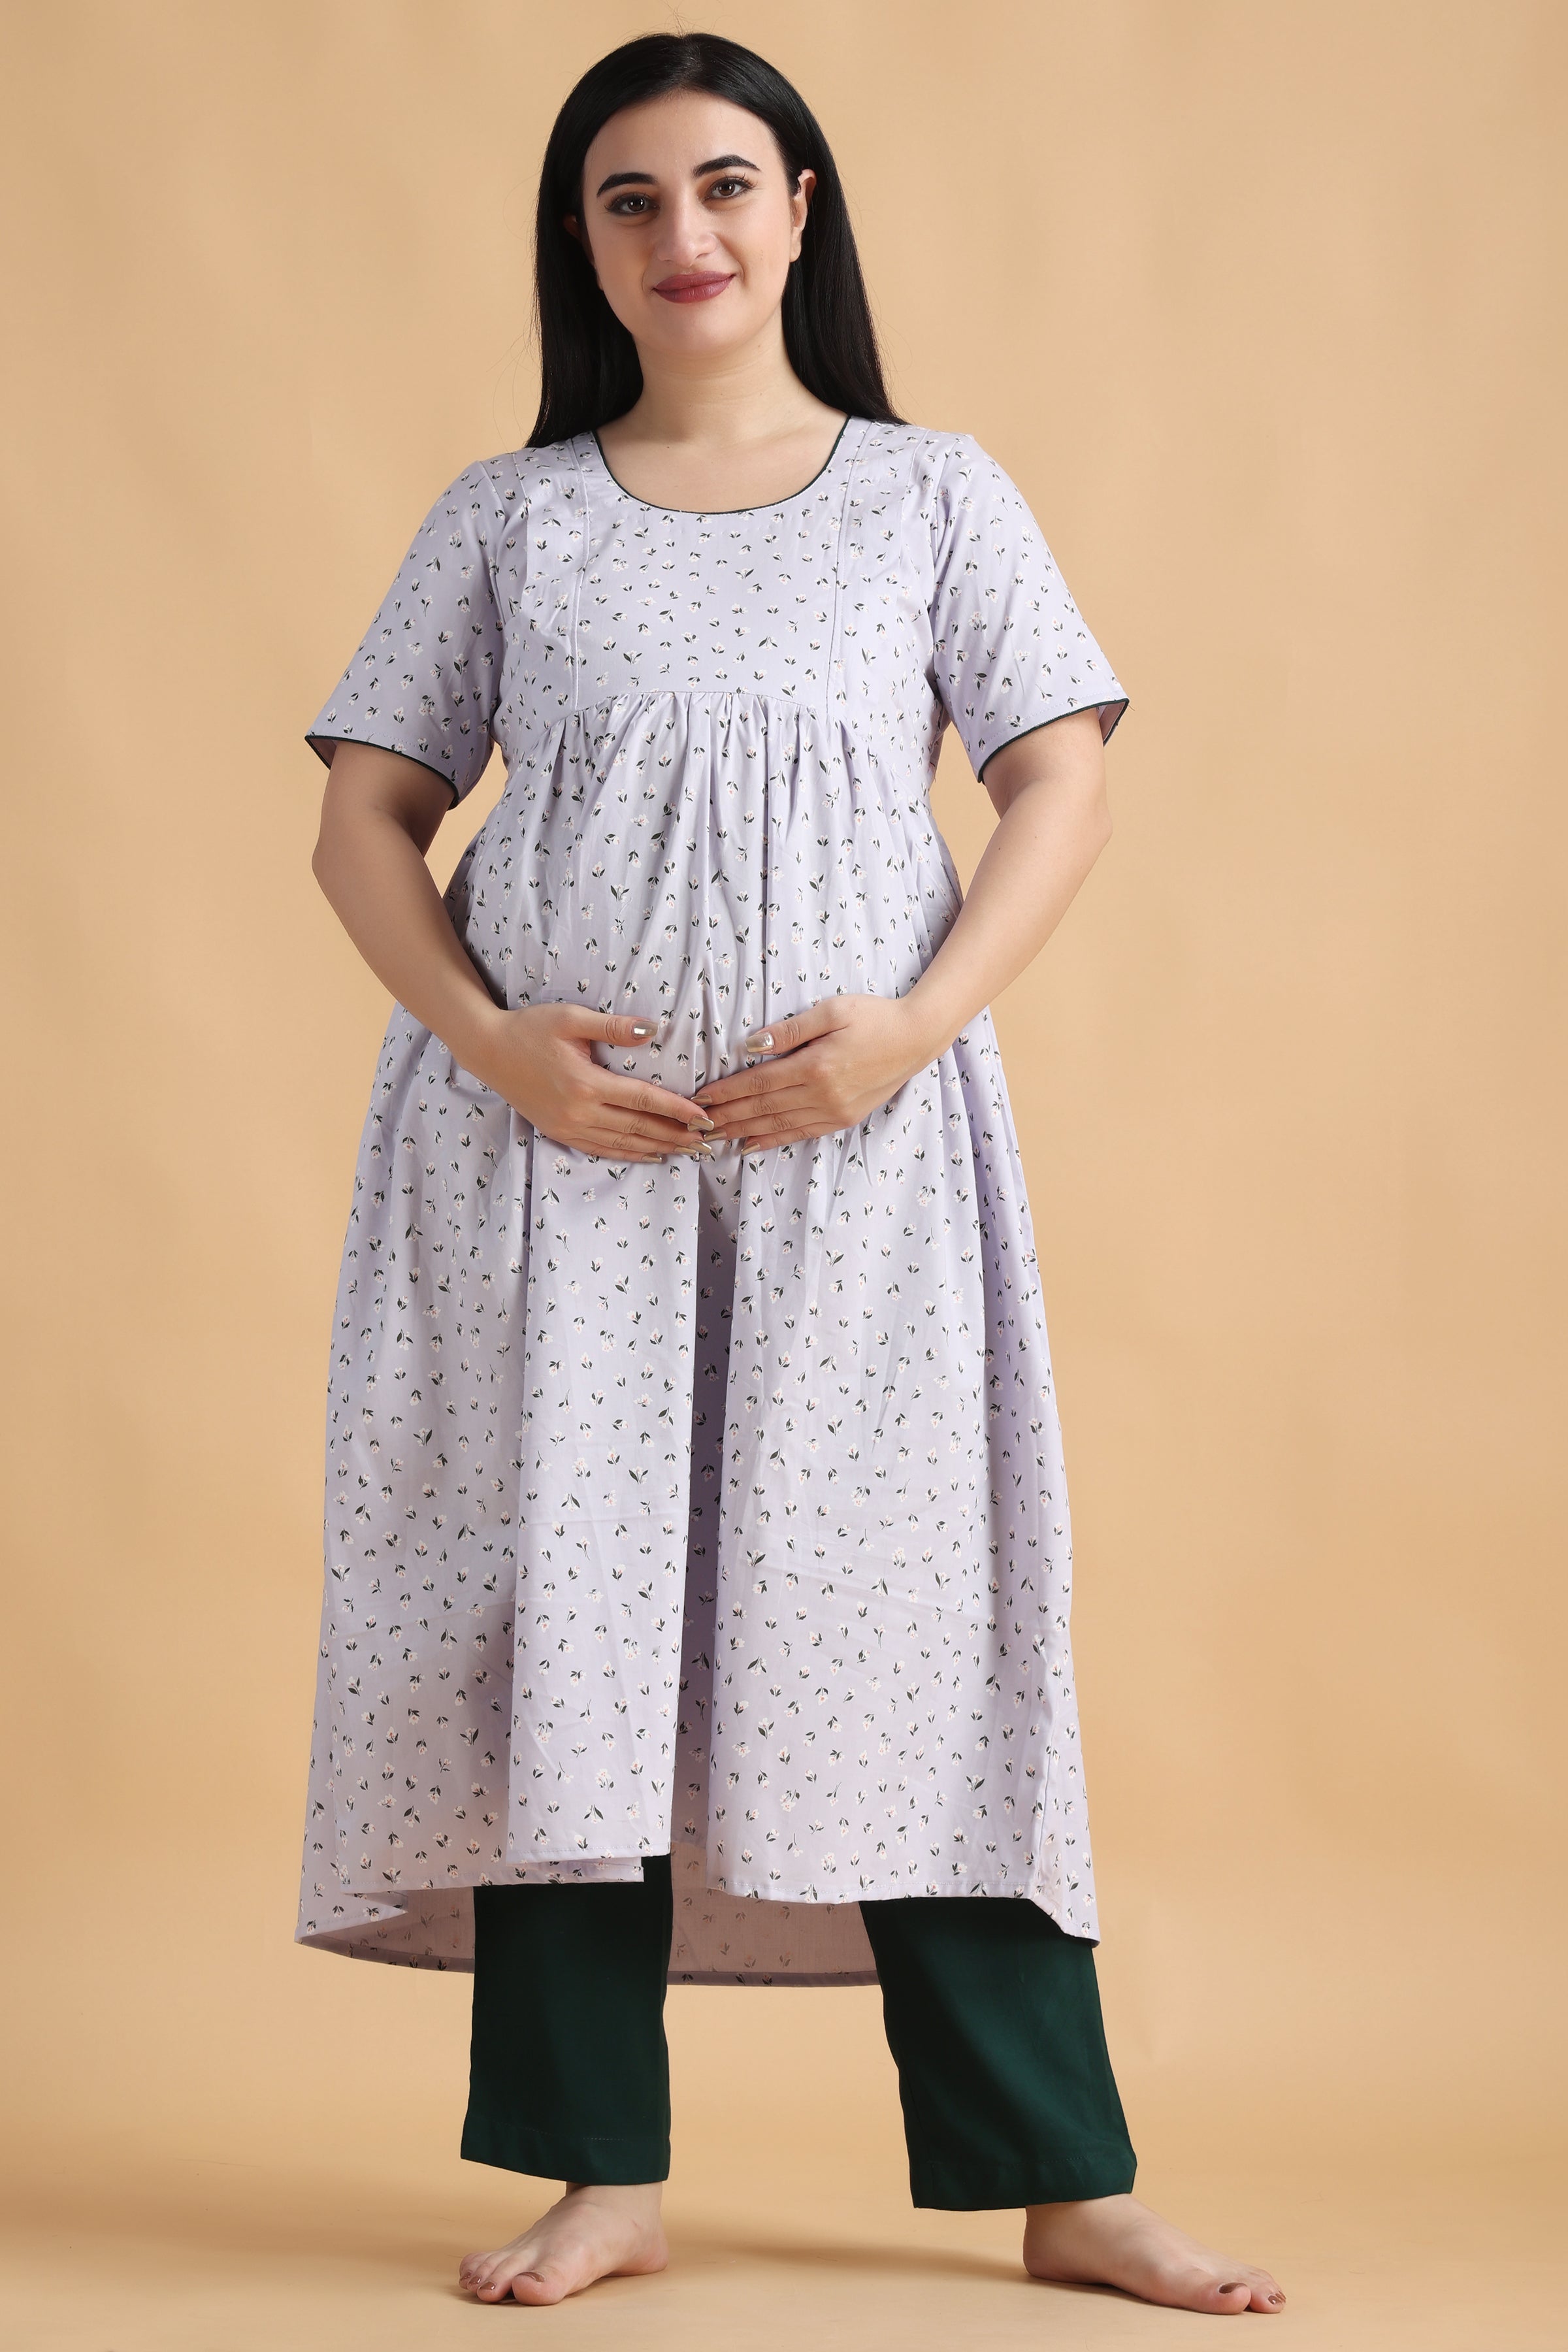 Buy Moms Kurtis A line Maternity Feeding wear for Women Feeding Kurtis with  Zipper with Pocket (46) Blue at Amazon.in